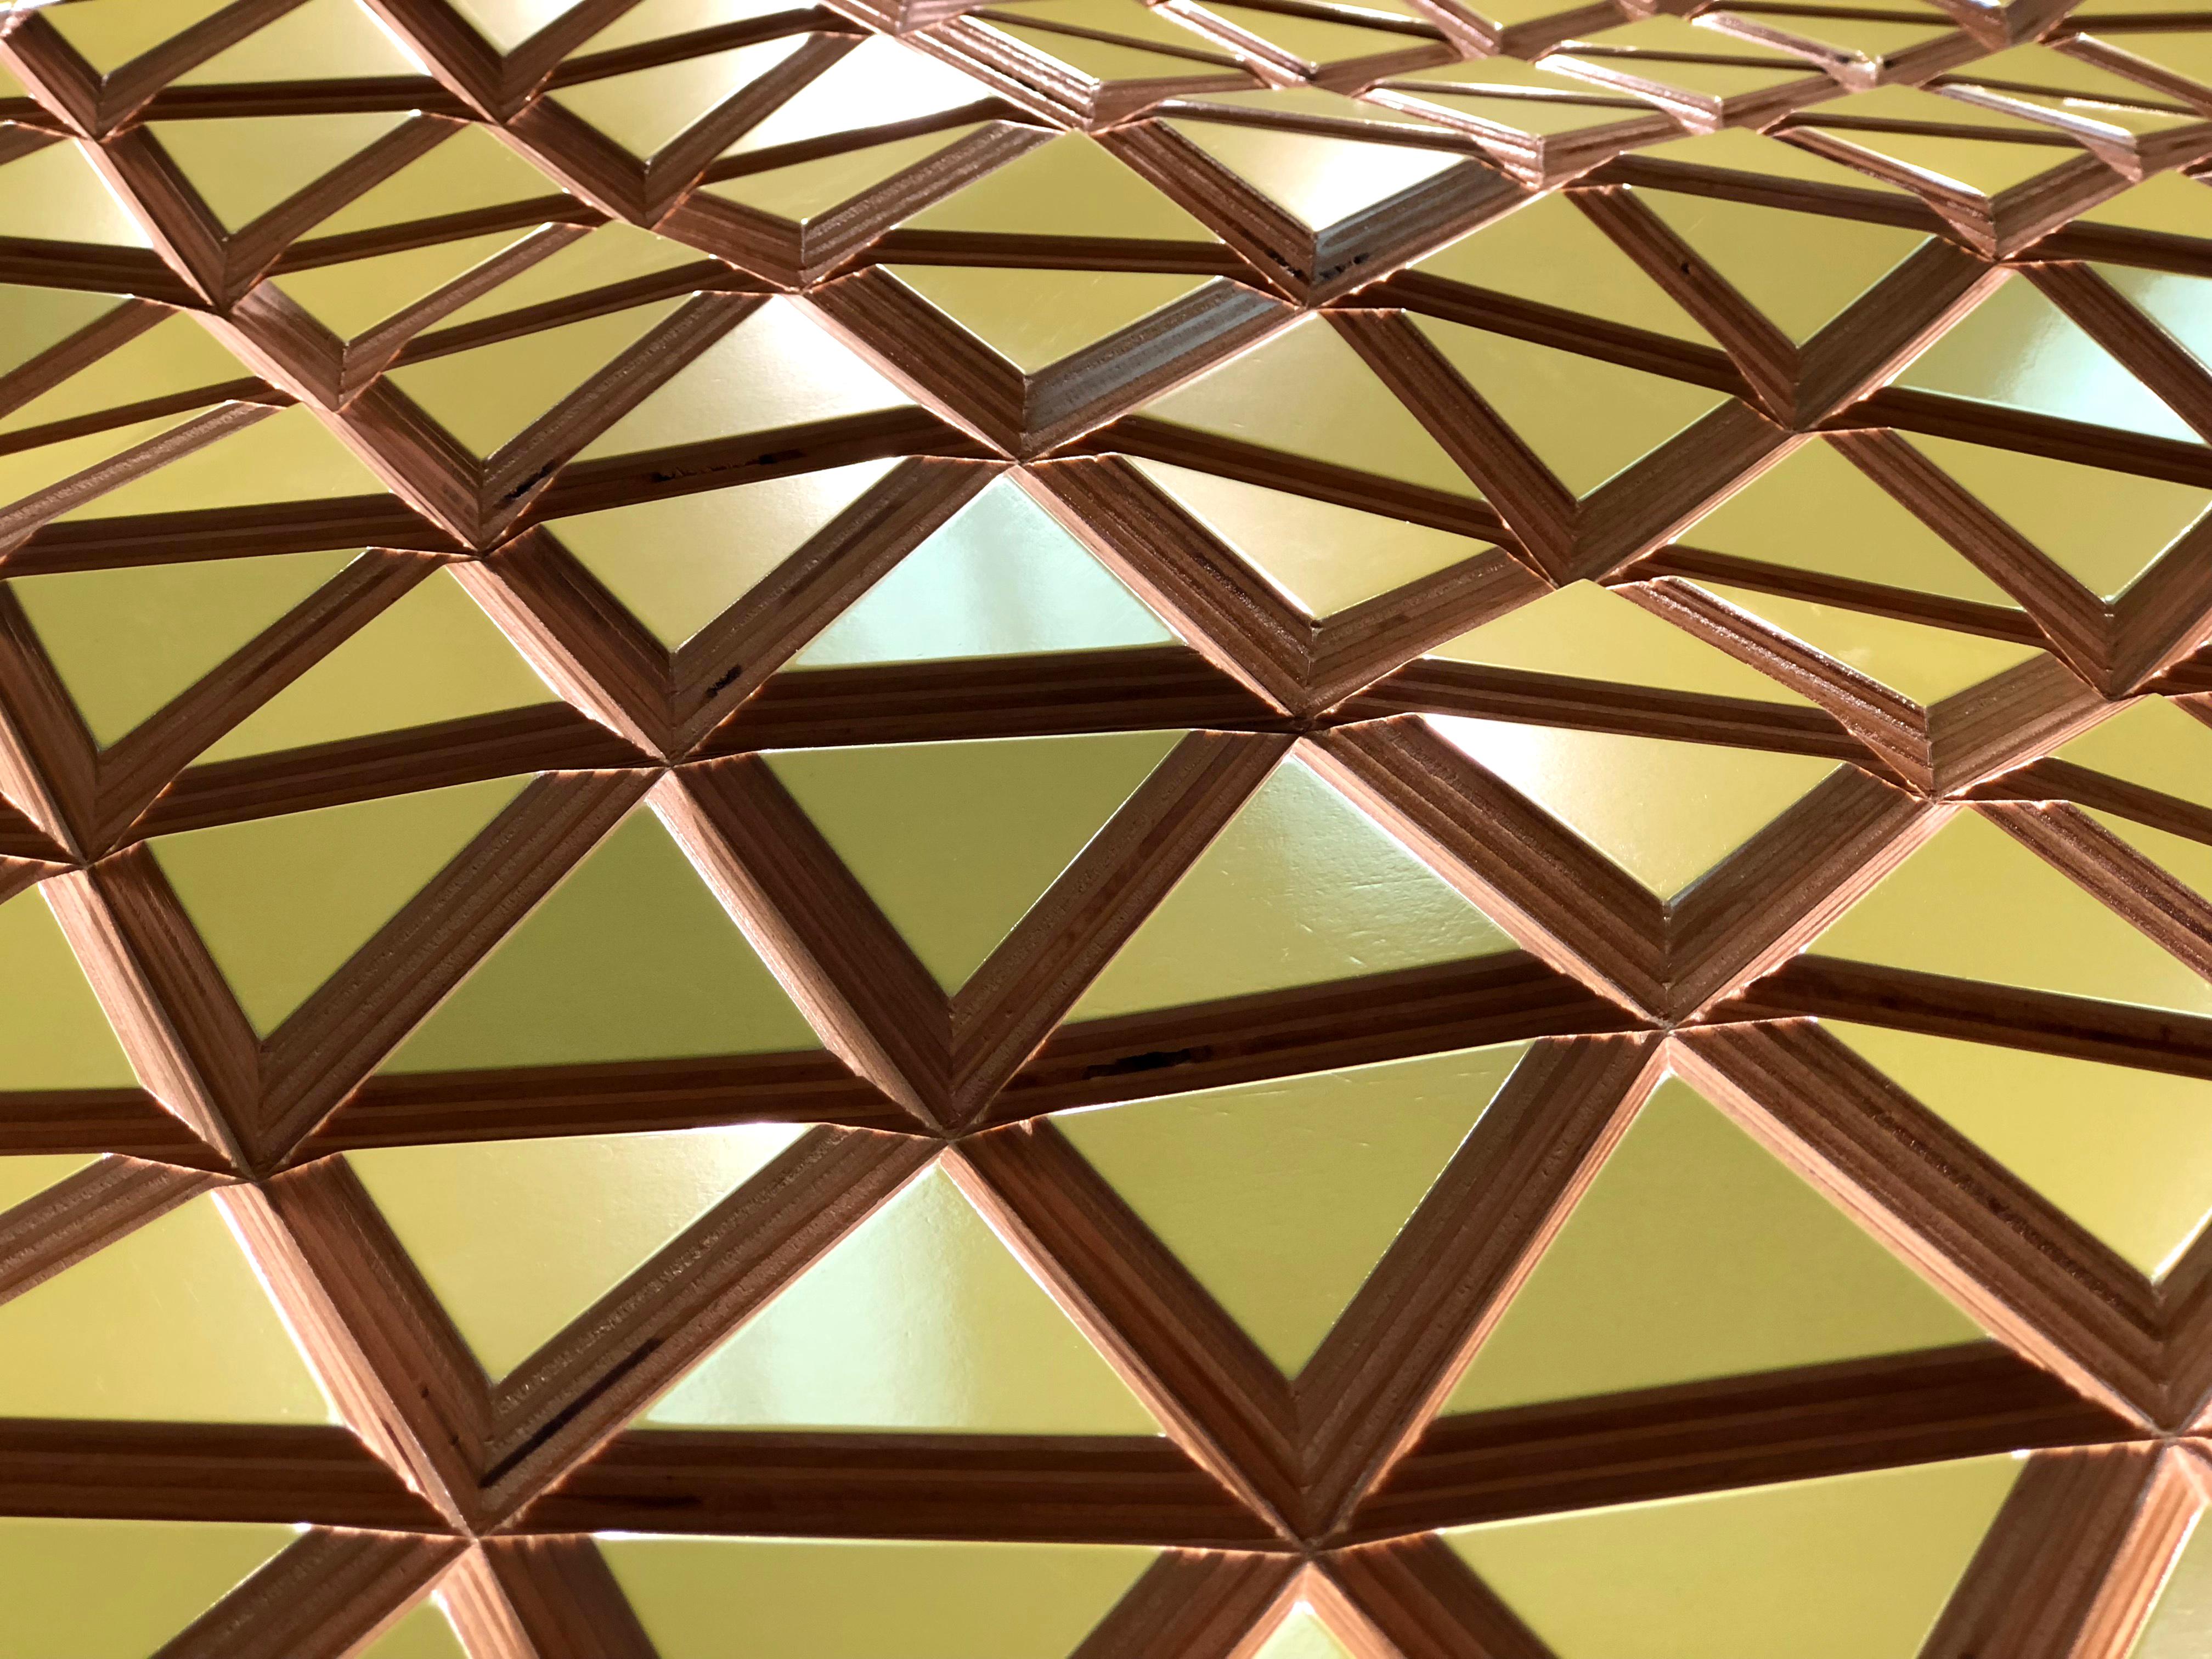 Honeycomb Conjecture, painted carved wood sculptural wall, parametric design 2